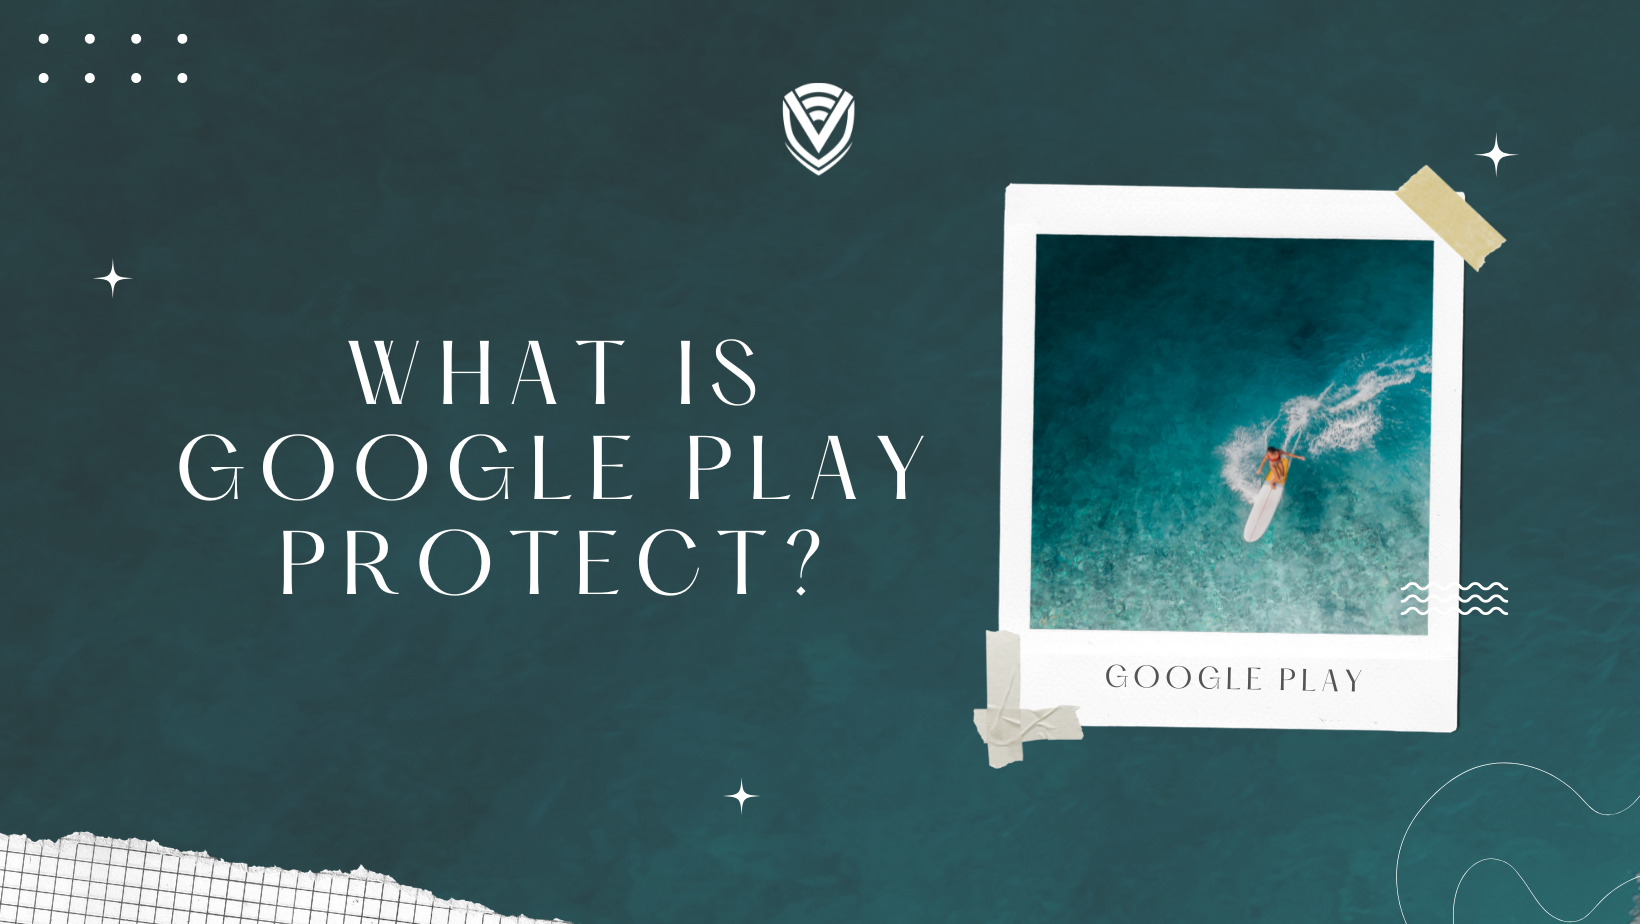 What is Google Play Protect?